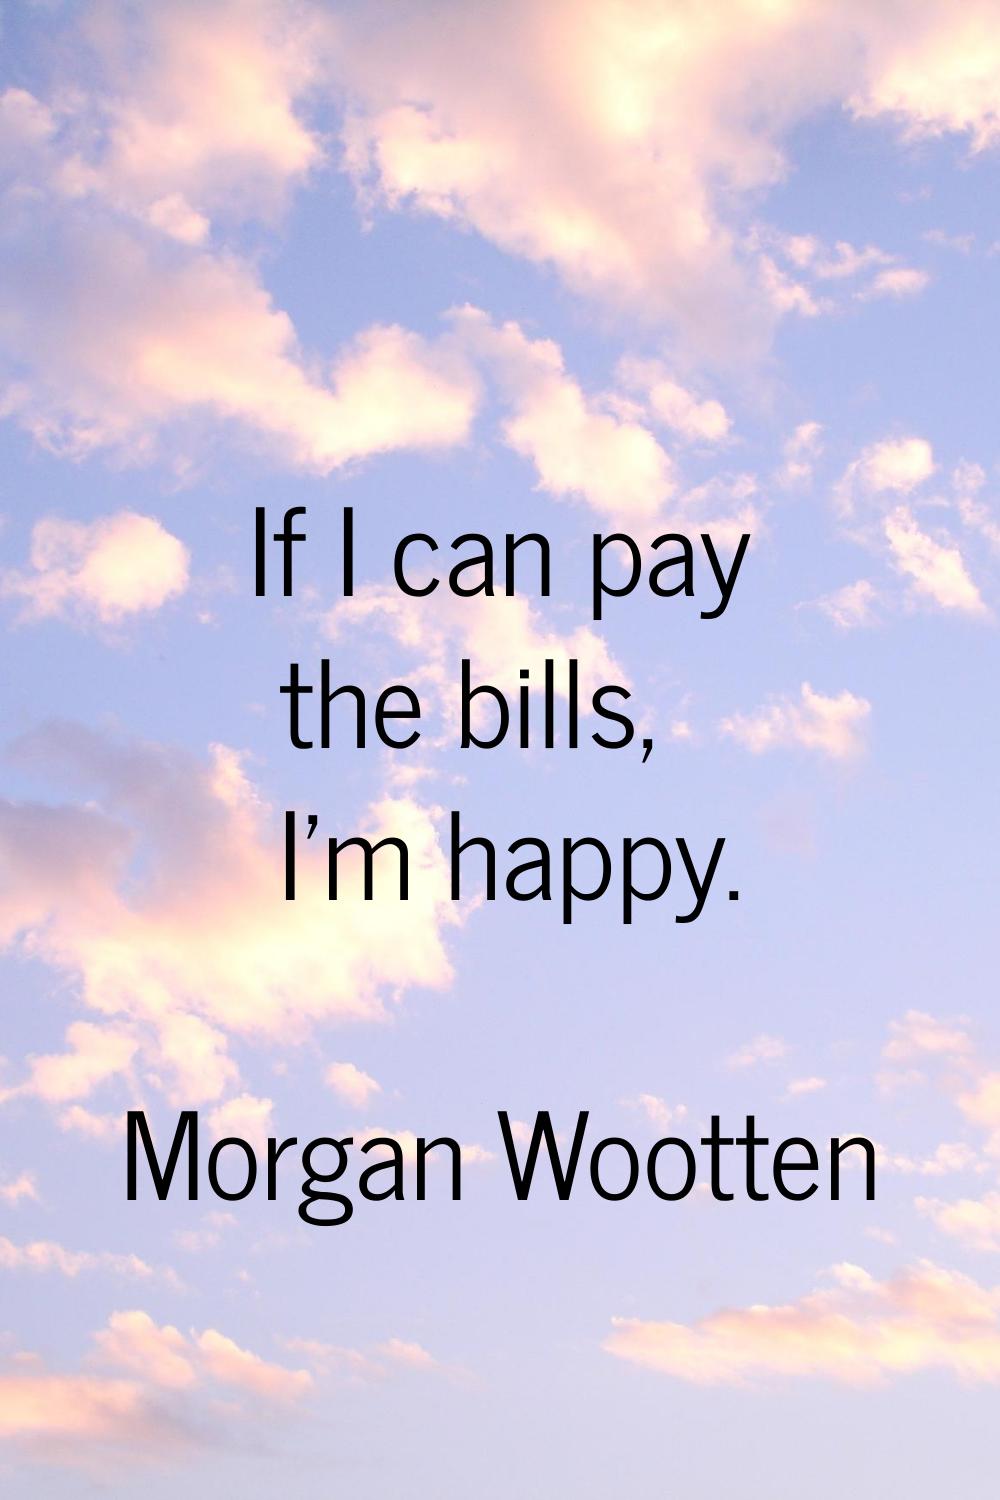 If I can pay the bills, I'm happy.